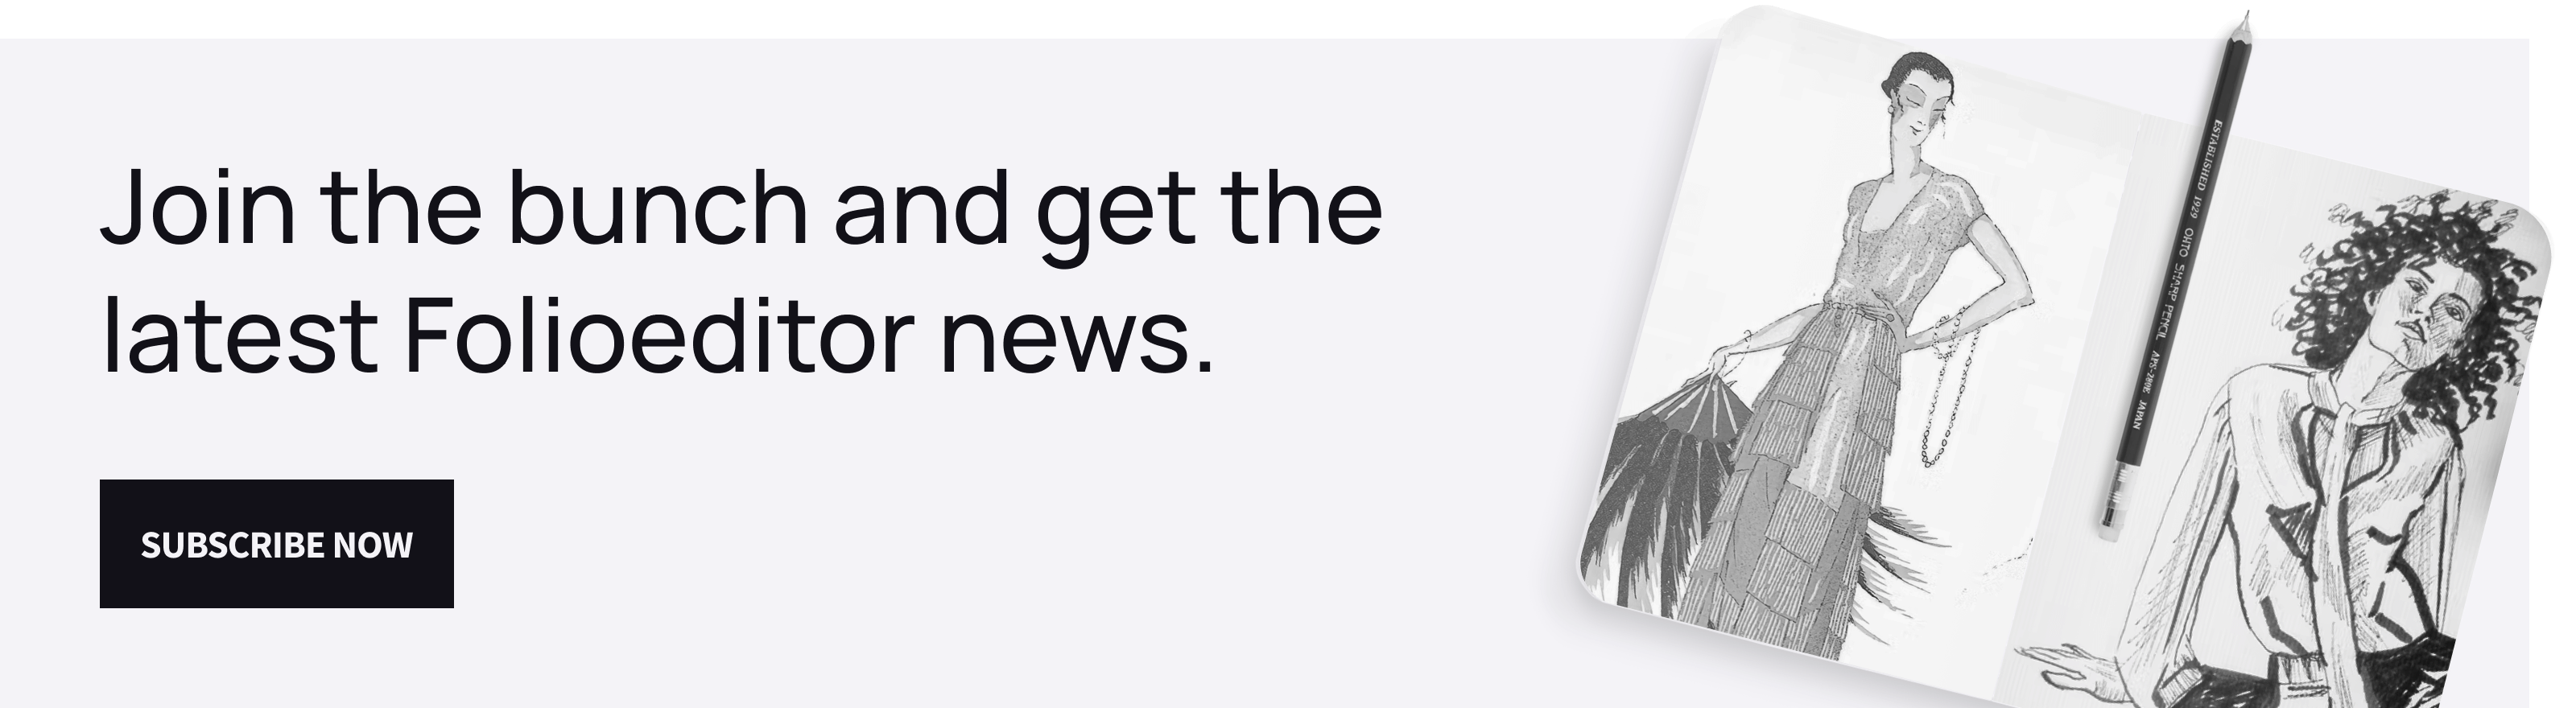 Join the bunch and get the latest Folioeditor news.